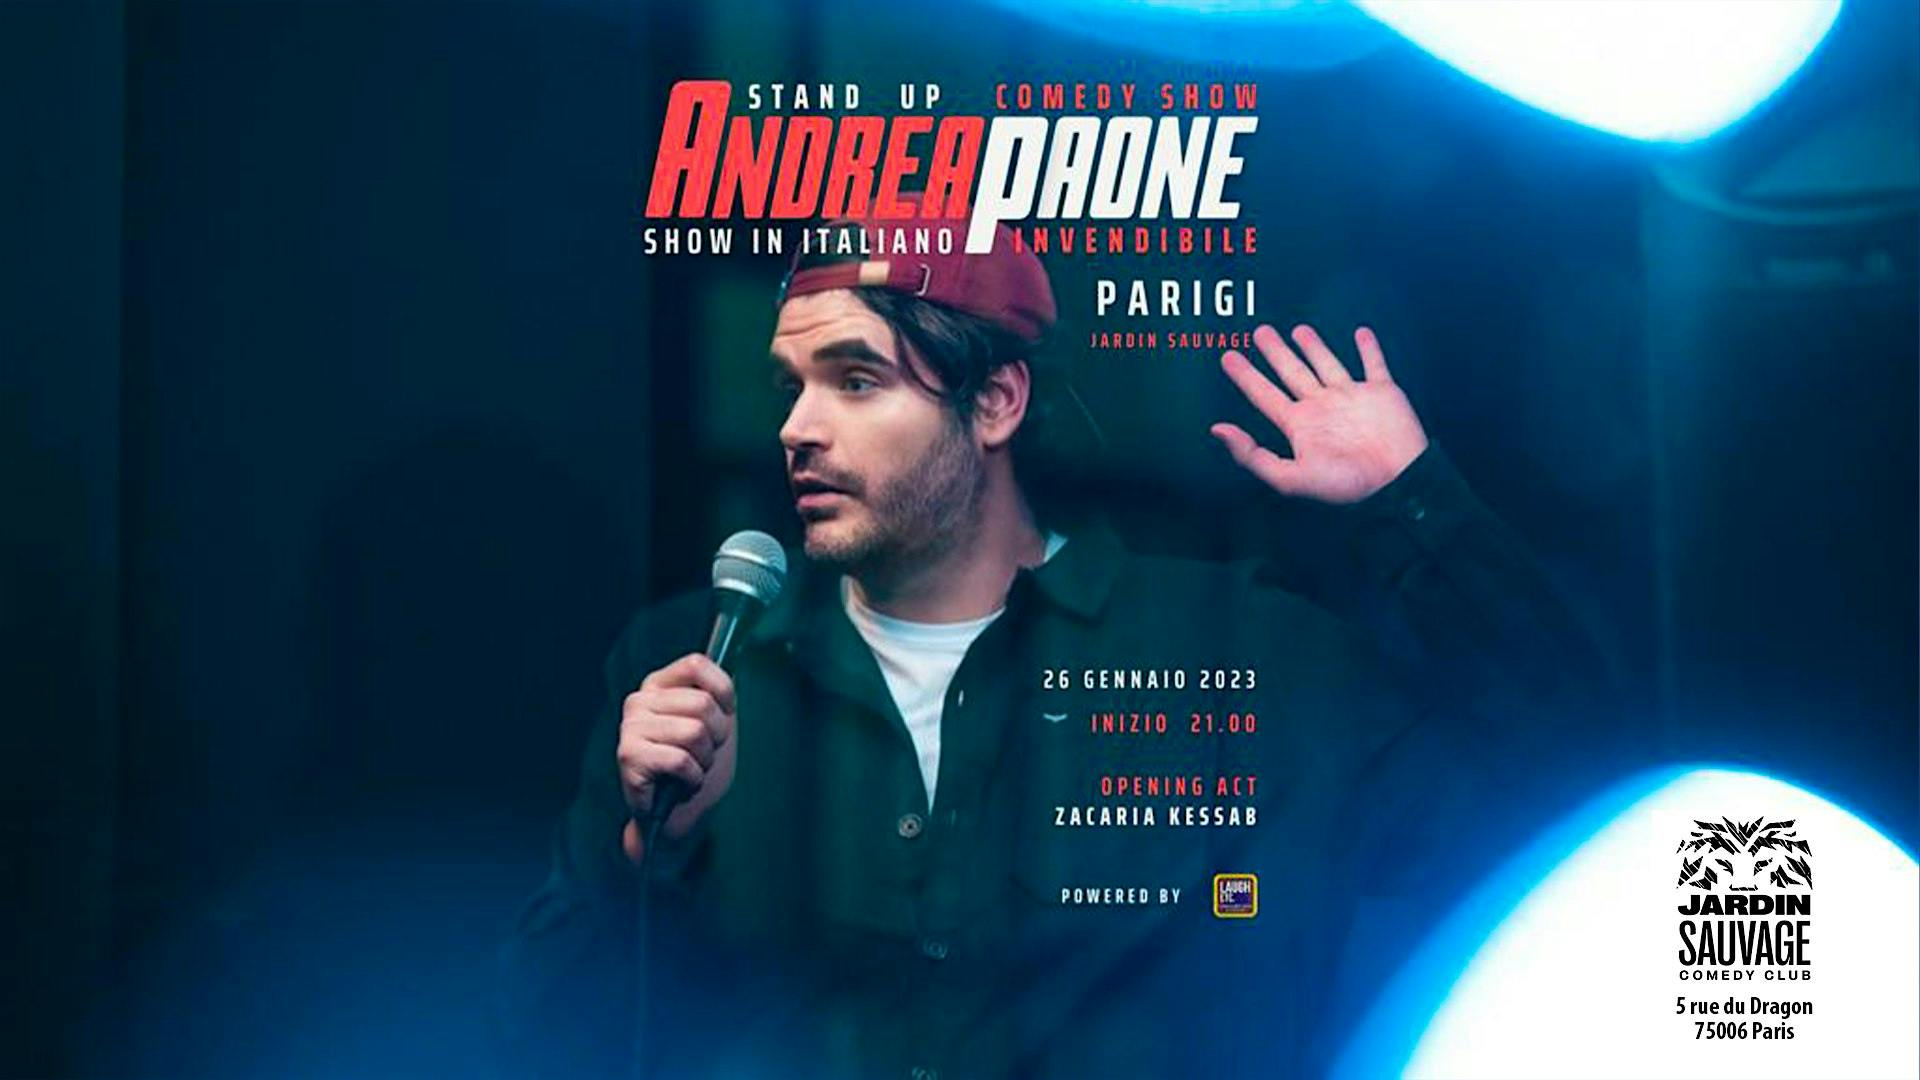 Andrea Paone - Stand up show in ITALIANO logo